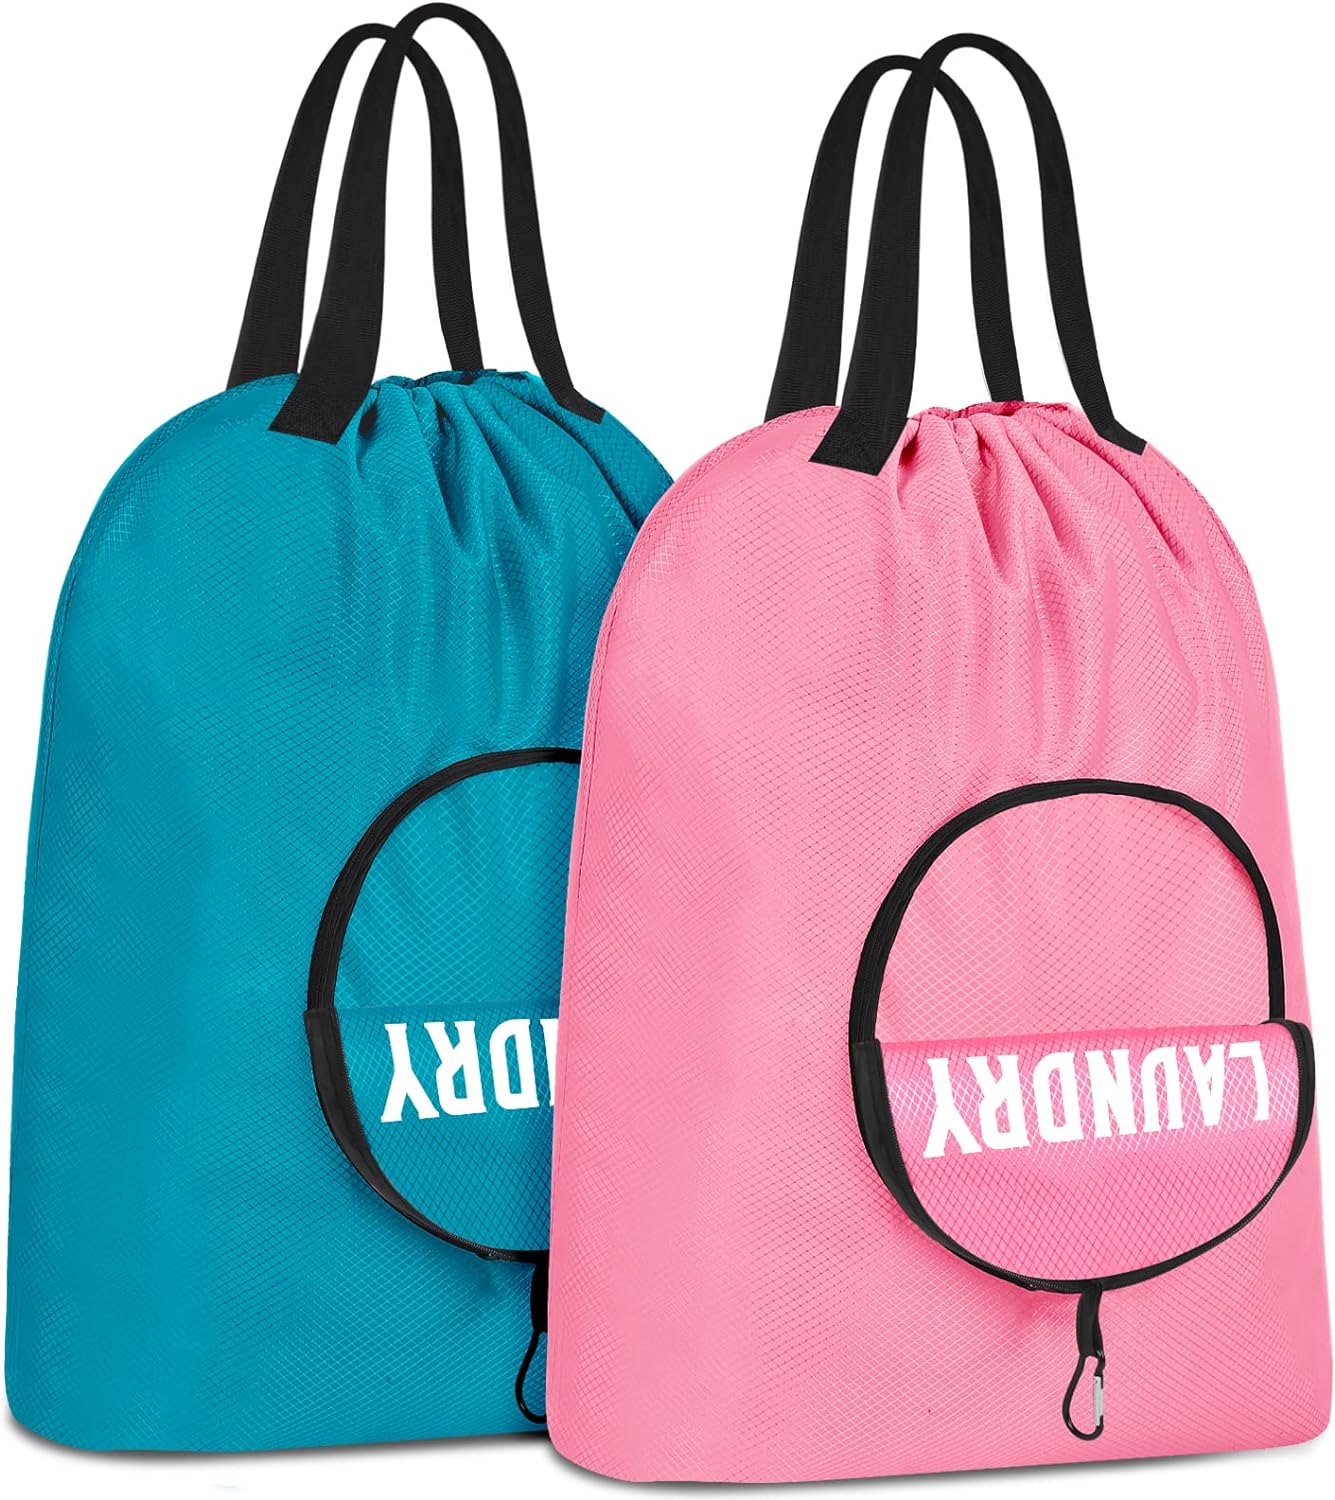 2 Pcs Travel Laundry Bag, Dirty Clothes Bag for Traveling with Handles and Carabiner Collapsible Laundry Bag for Travel, Camp, Fitness, and Students (Pink+Blue)